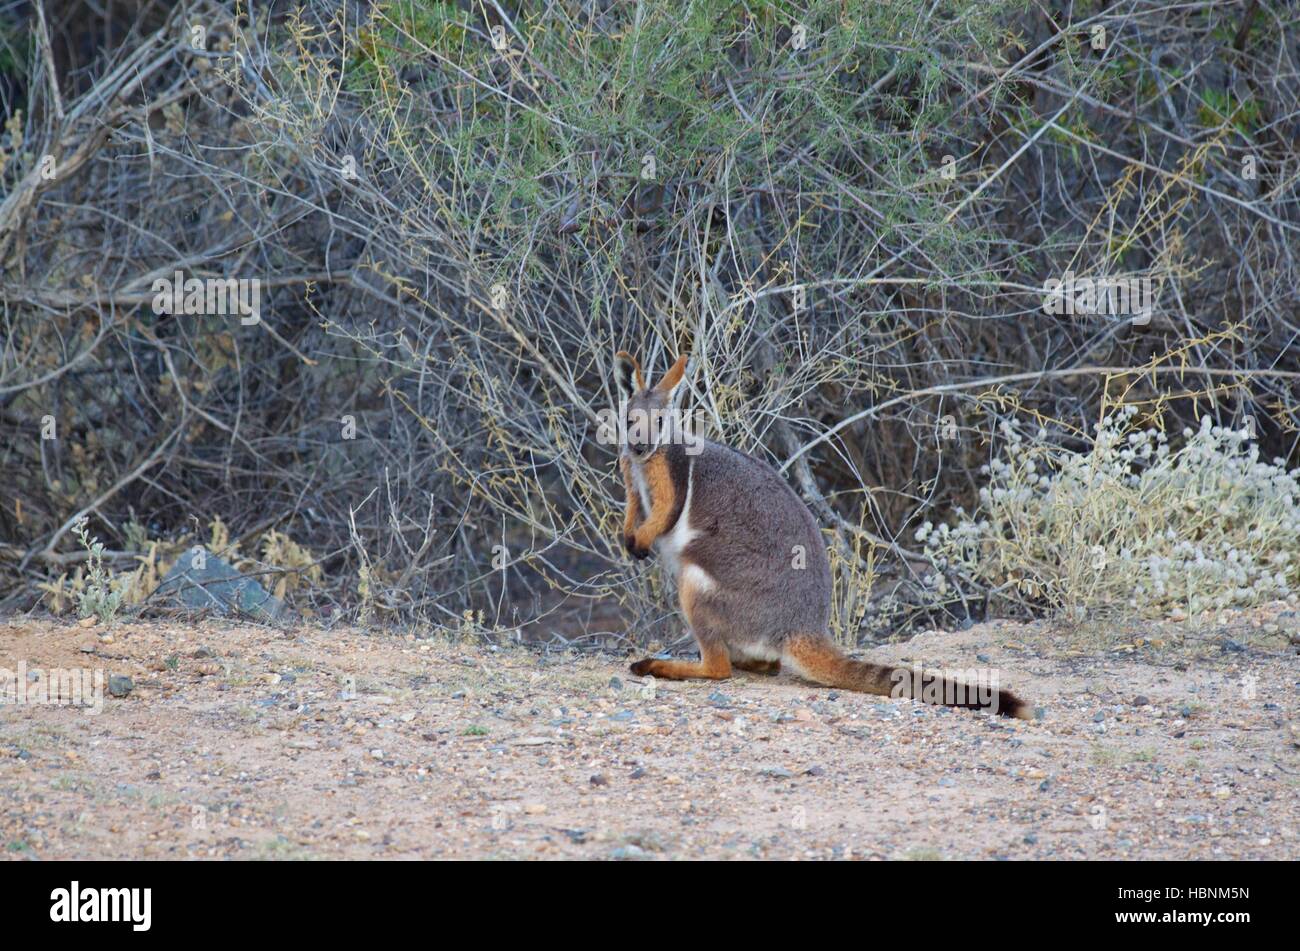 A Yellow-footed Rock Wallaby (Petrogale xanthopus) along a road clearing in Arkaroola Wilderness Sanctuary, South Australia Stock Photo